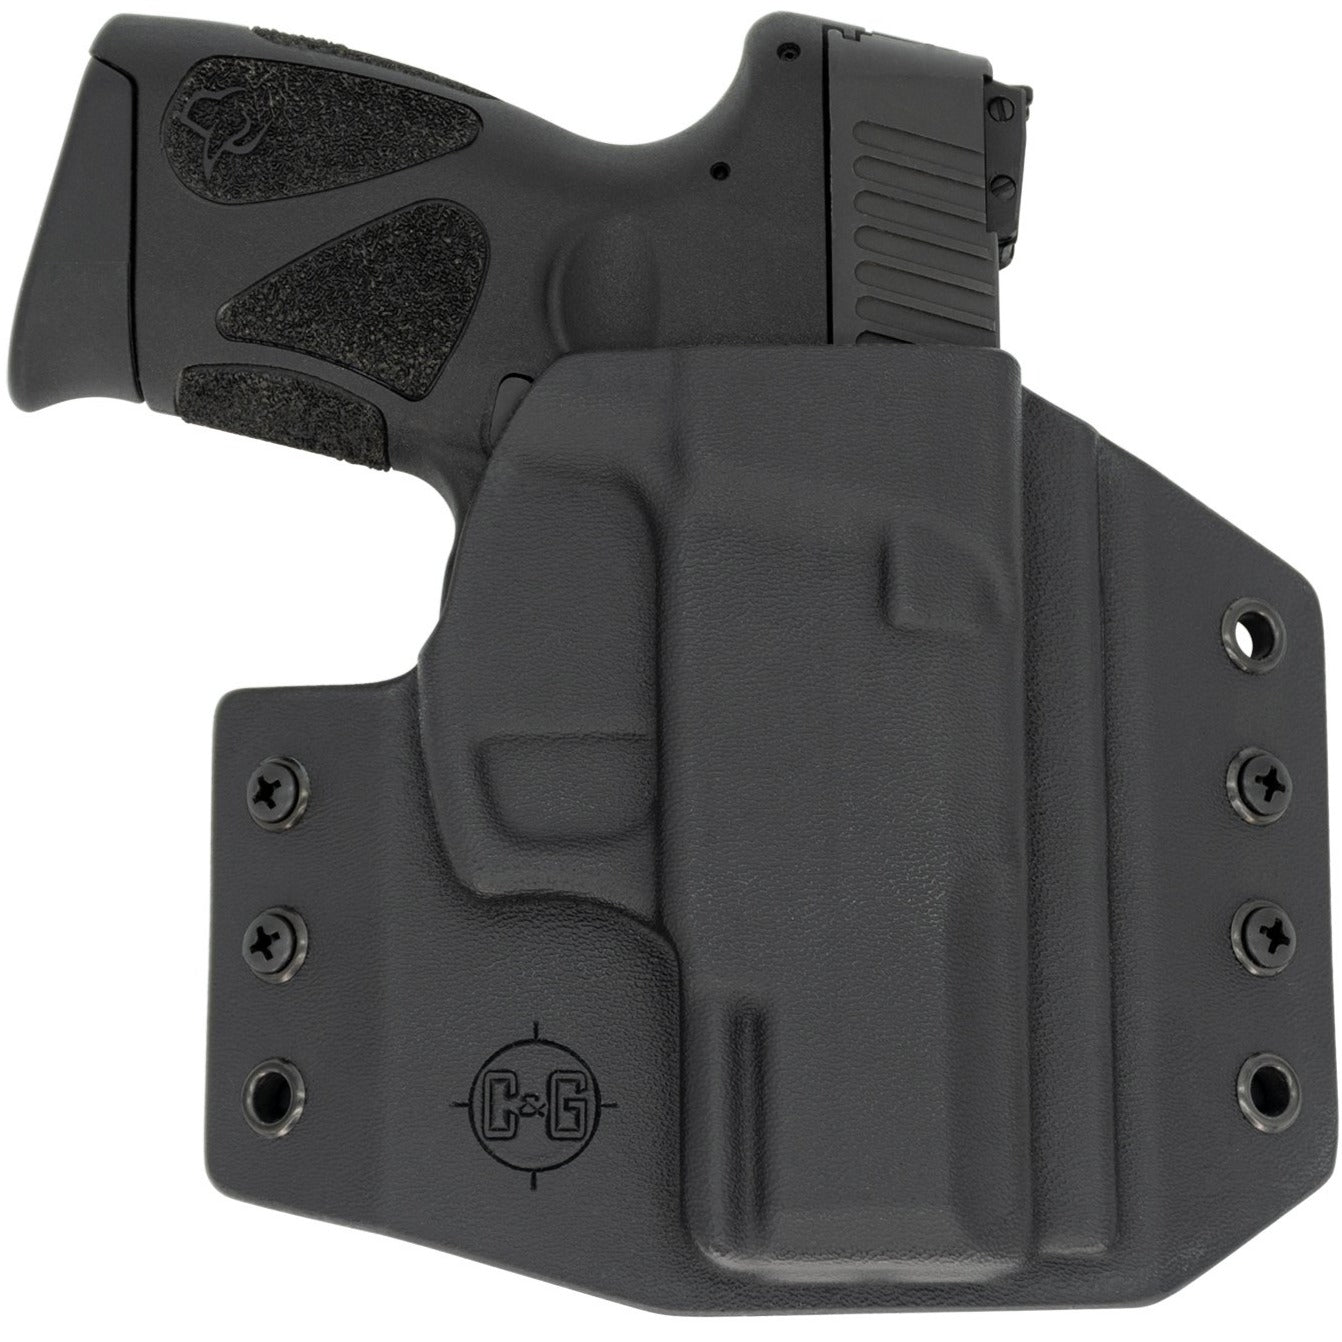 This is the C&G Holsters outside the waistband Covert series for the Taurus PT111 Millennium G2C in right hand, black and gun.